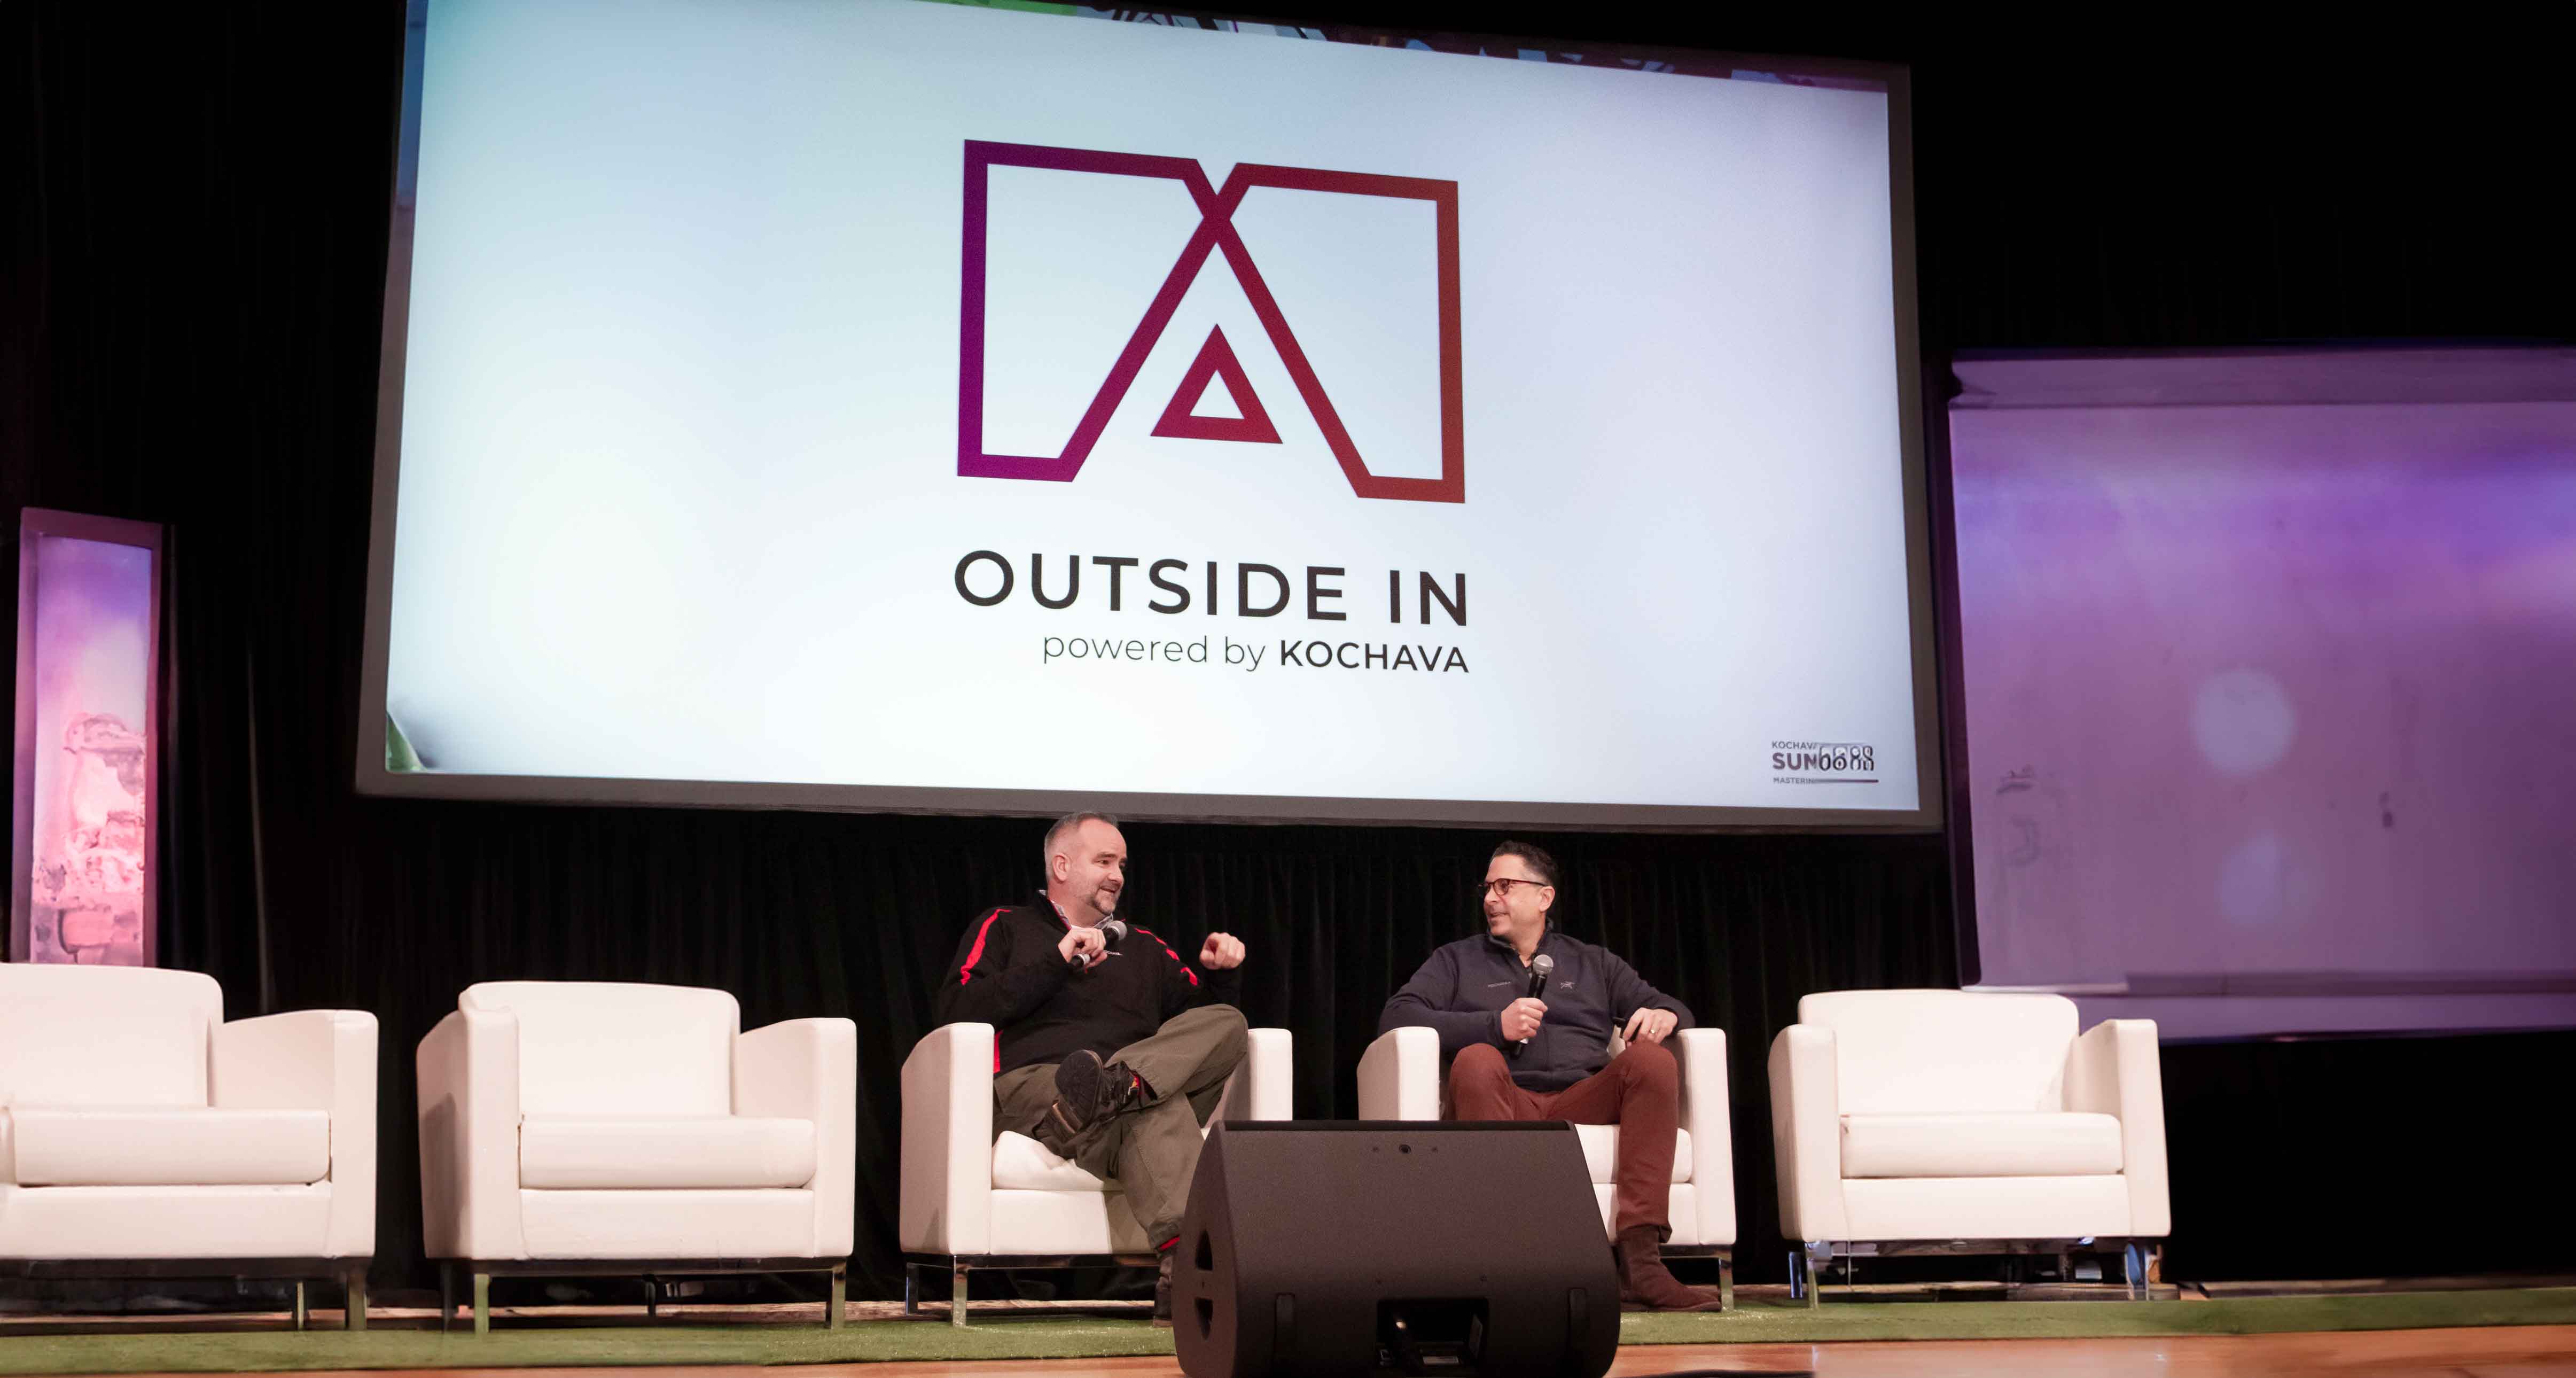 Jonathan Gudai, CEO, Adomni and Charles Manning, Founder and CEO, Kochava, unveil new solution for CTV to drive incrementality. "Outside In" programme unlocks new retargeting and measurement capabilities. (Photo: Business Wire)